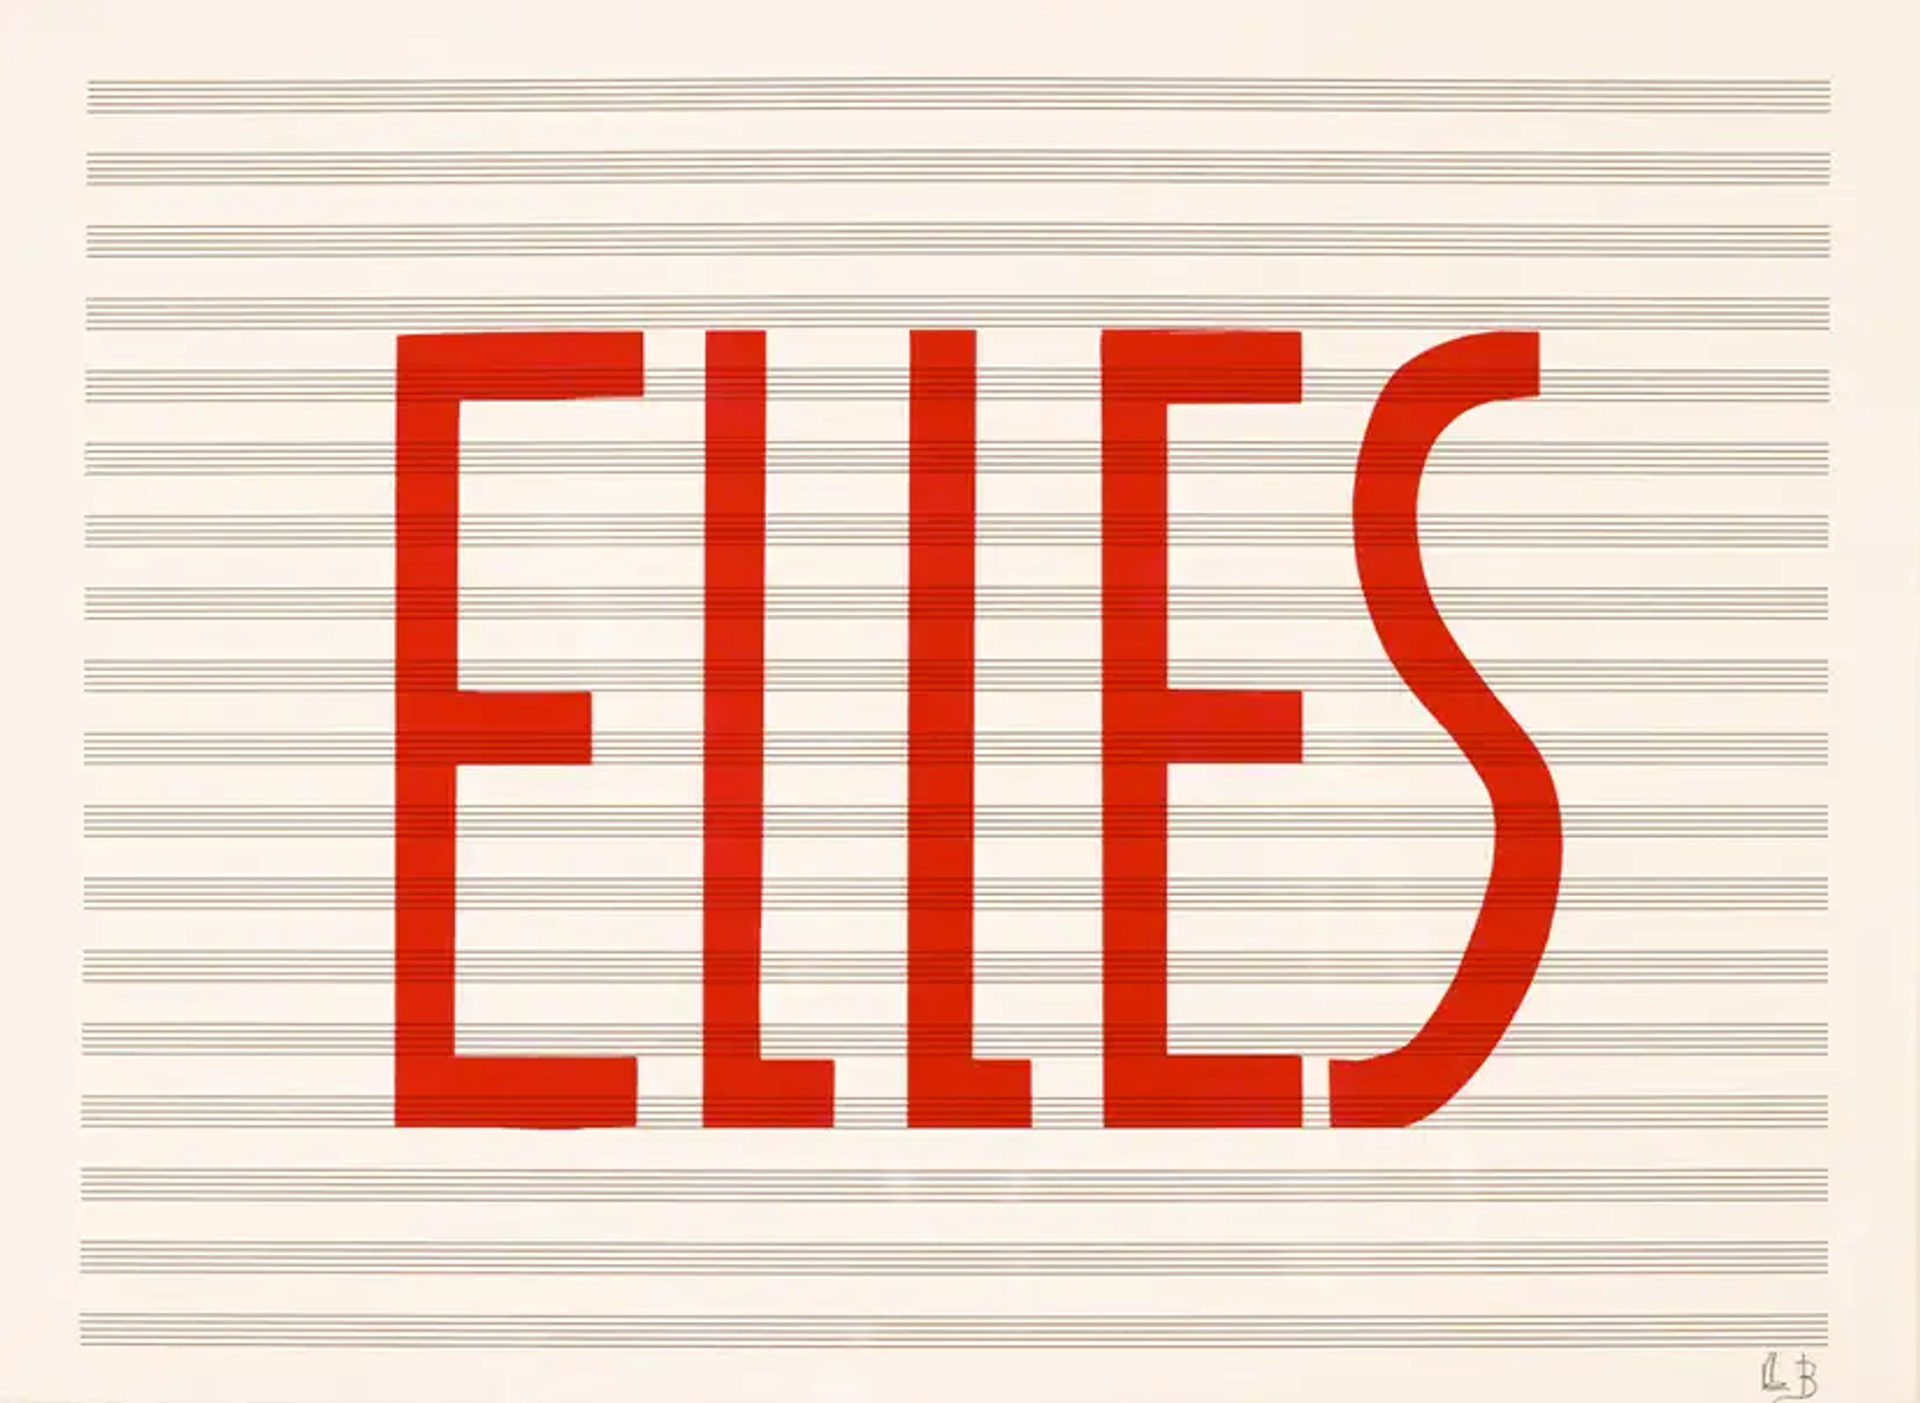 This print by Louise Bourgeois shows the word "Elles" in all capital red letters, against a striped cream and grey background.